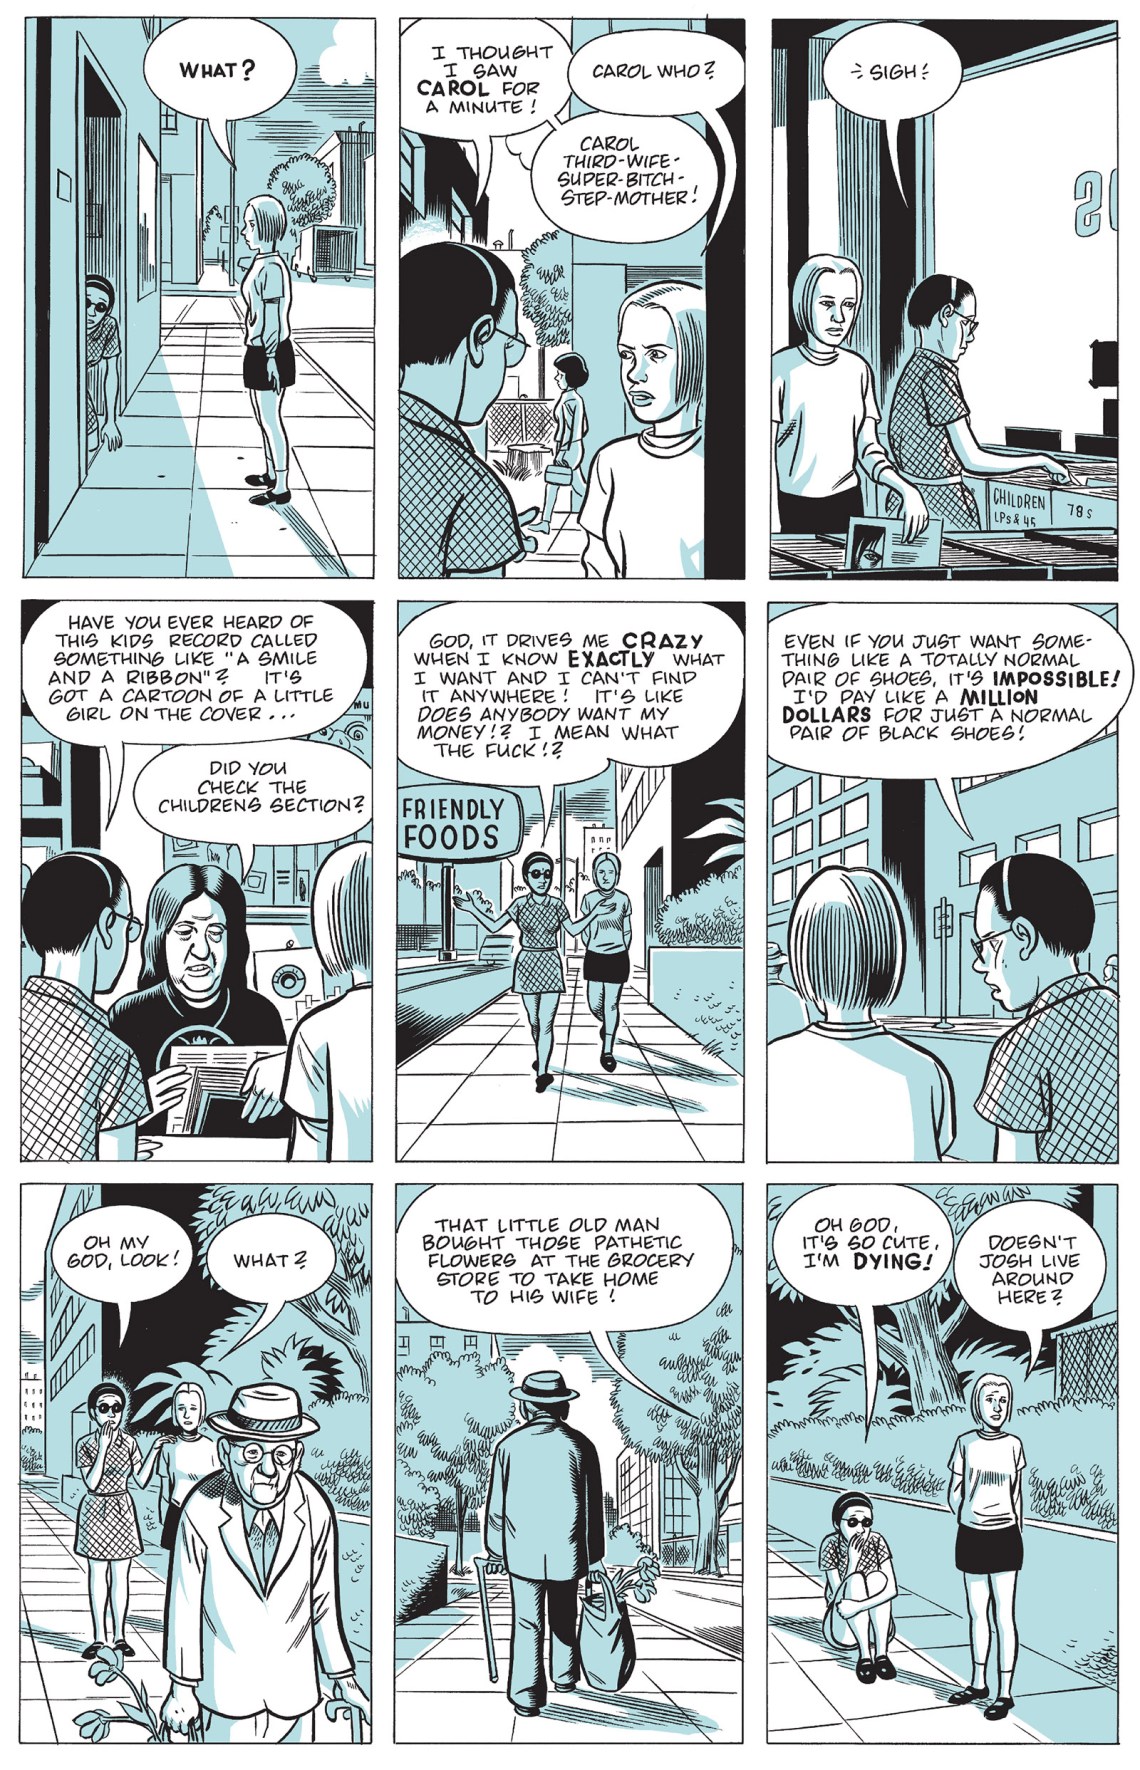 A page from Daniel Clowes’s ‘Ghost World’